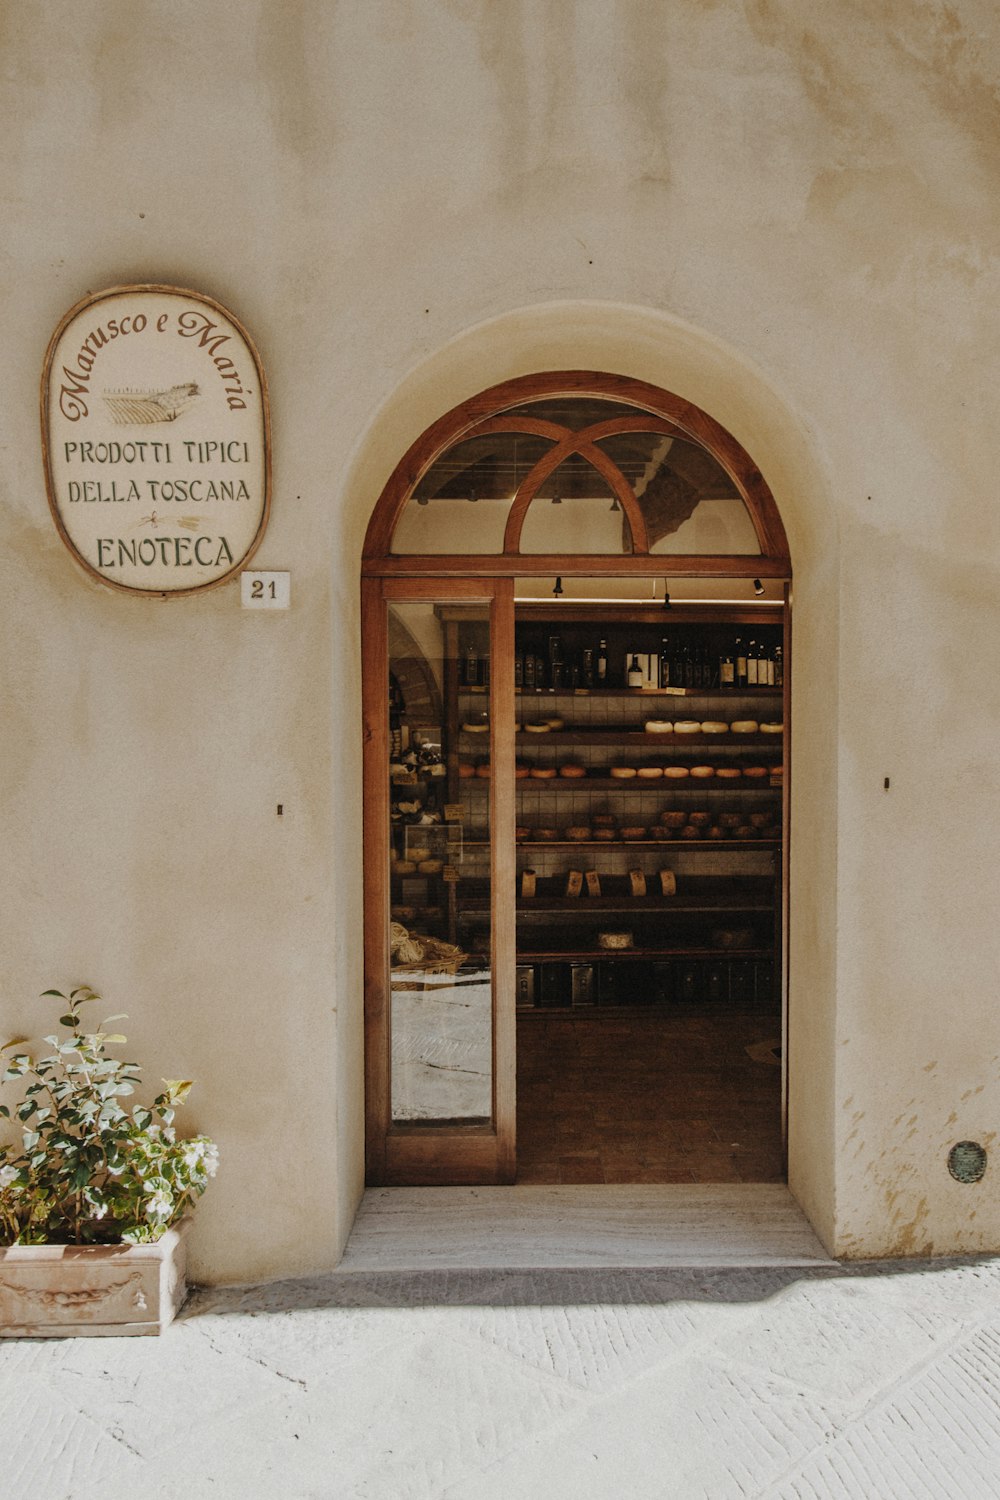 the entrance to a wine shop with a clock on the wall